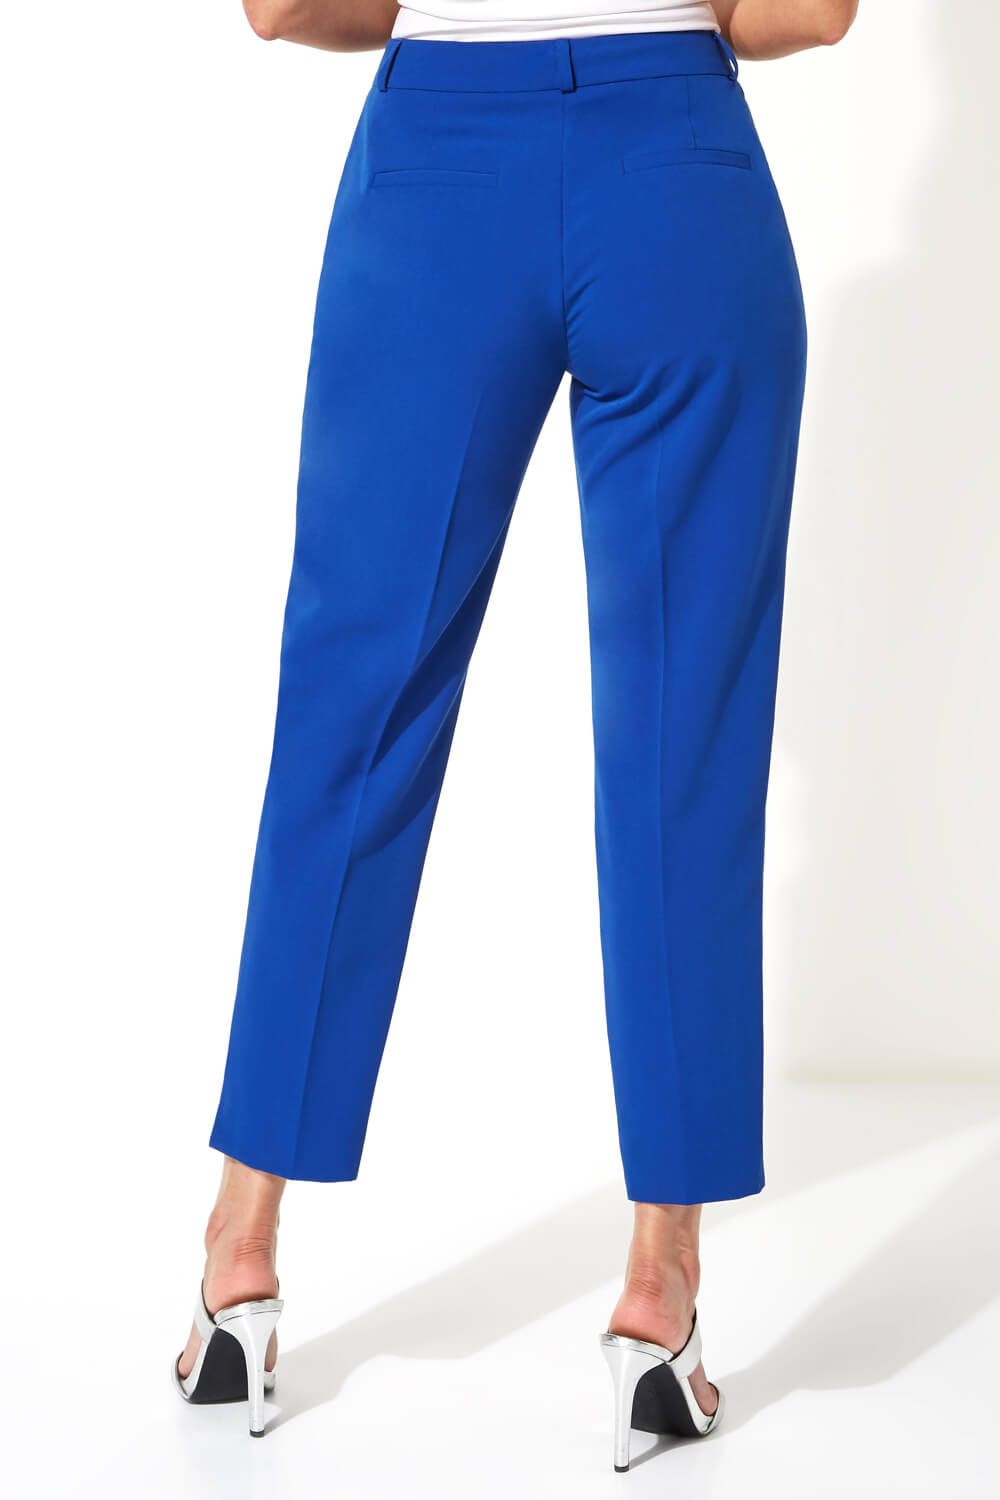 Royal Blue Straight Leg Tapered Trousers, Image 2 of 5